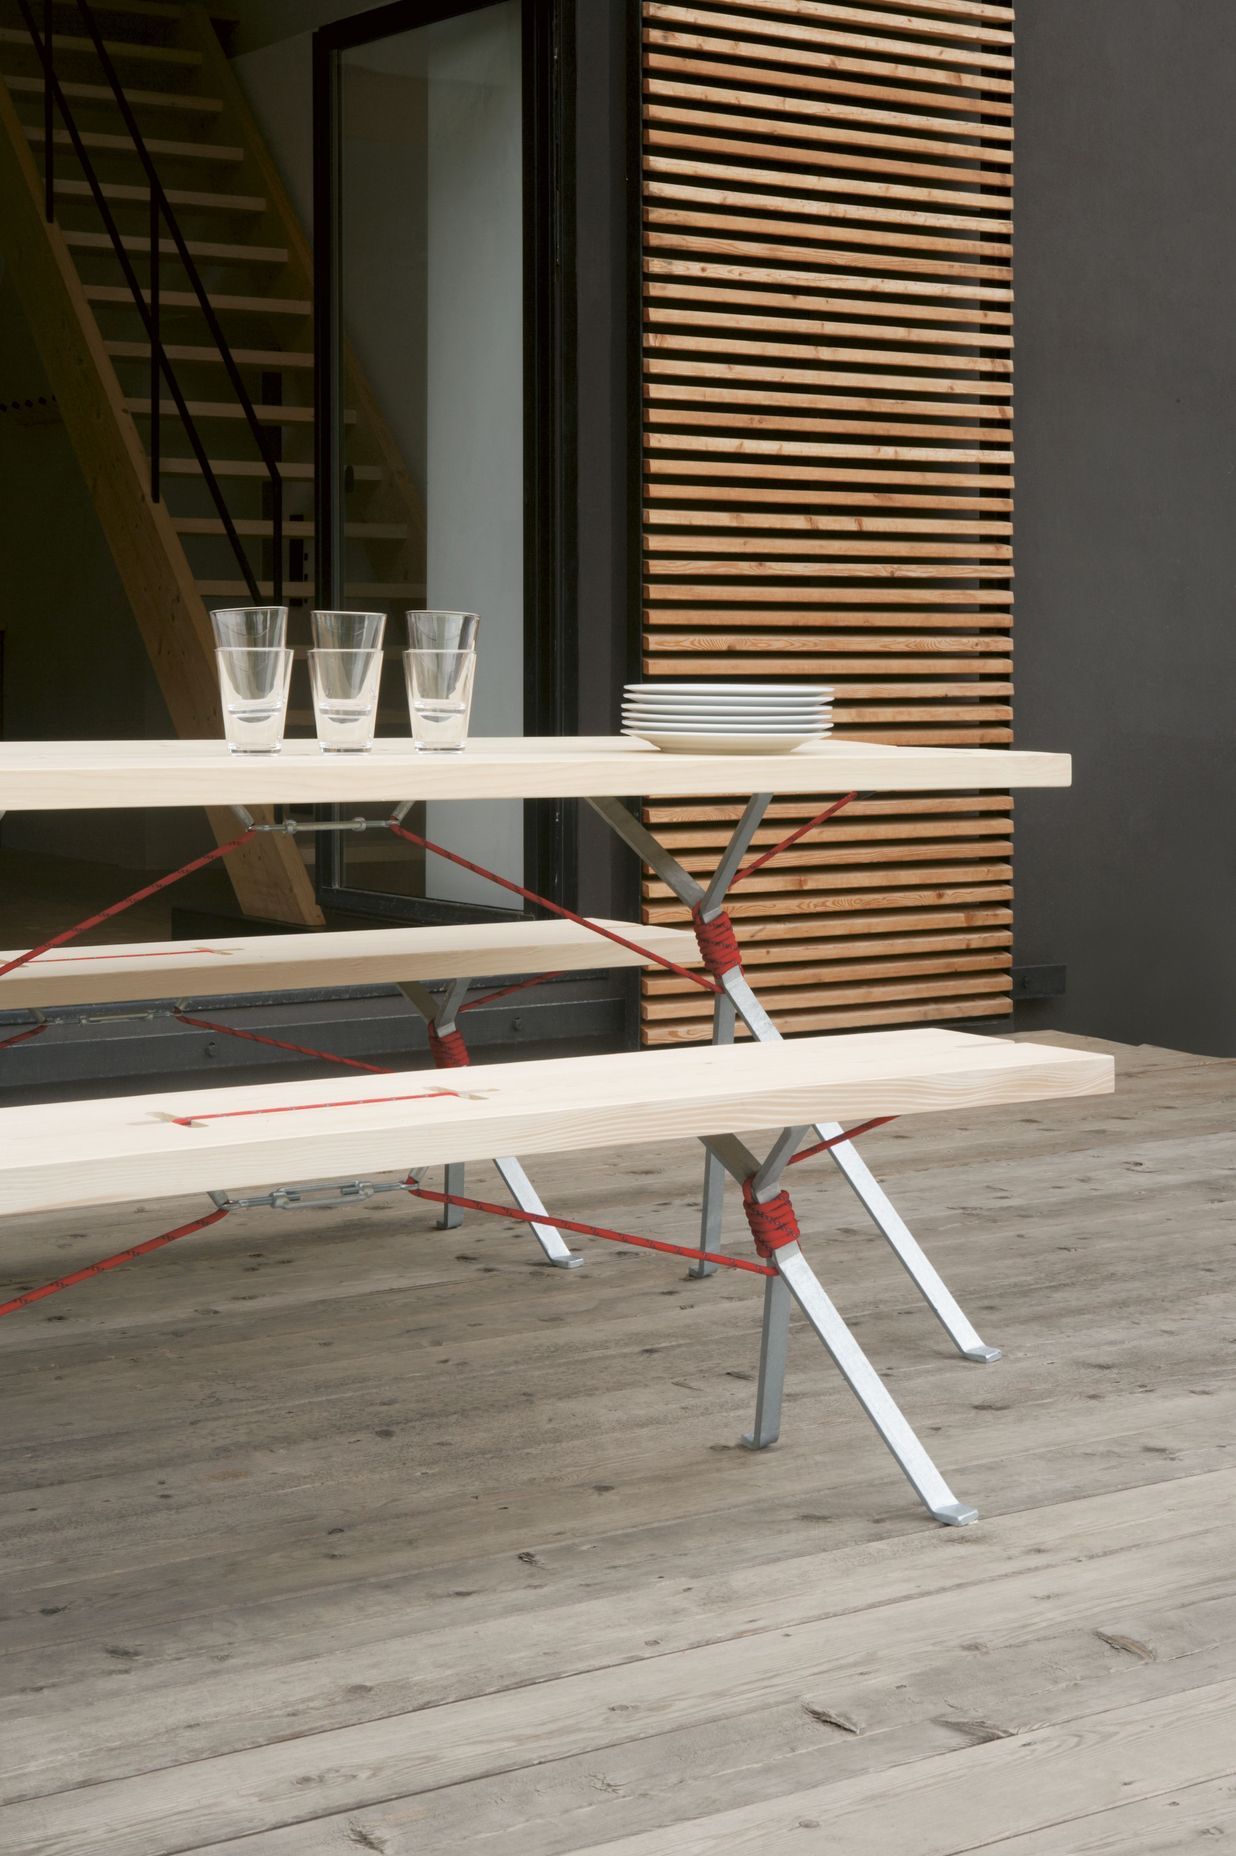 Kampenwand features galvanised or waxed steel legs and comes with either red or black rope.